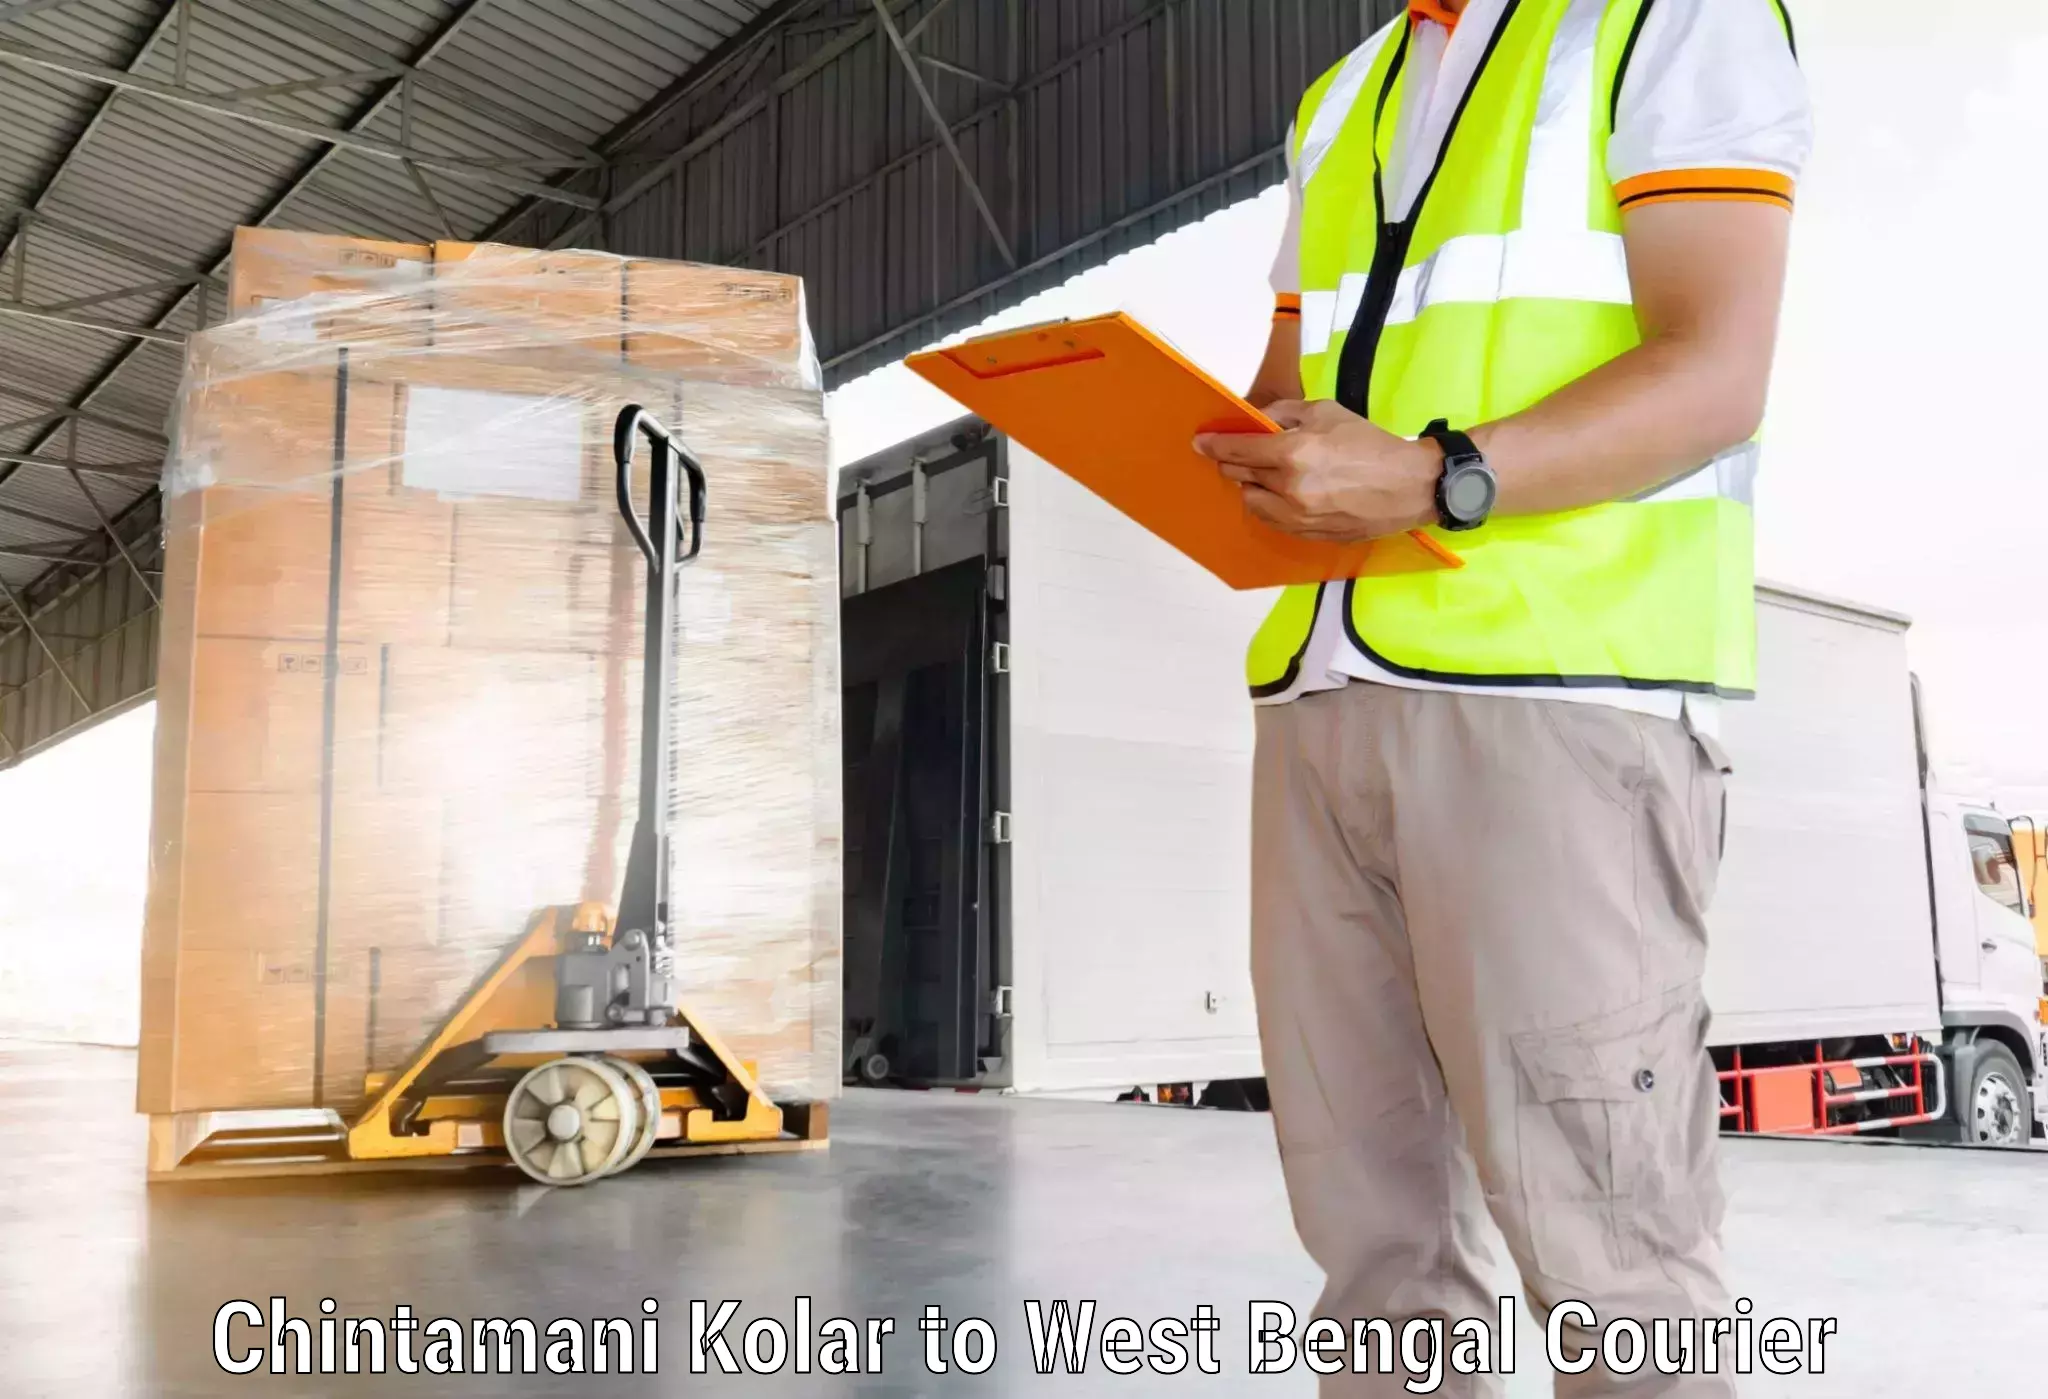 Global courier networks Chintamani Kolar to West Bengal